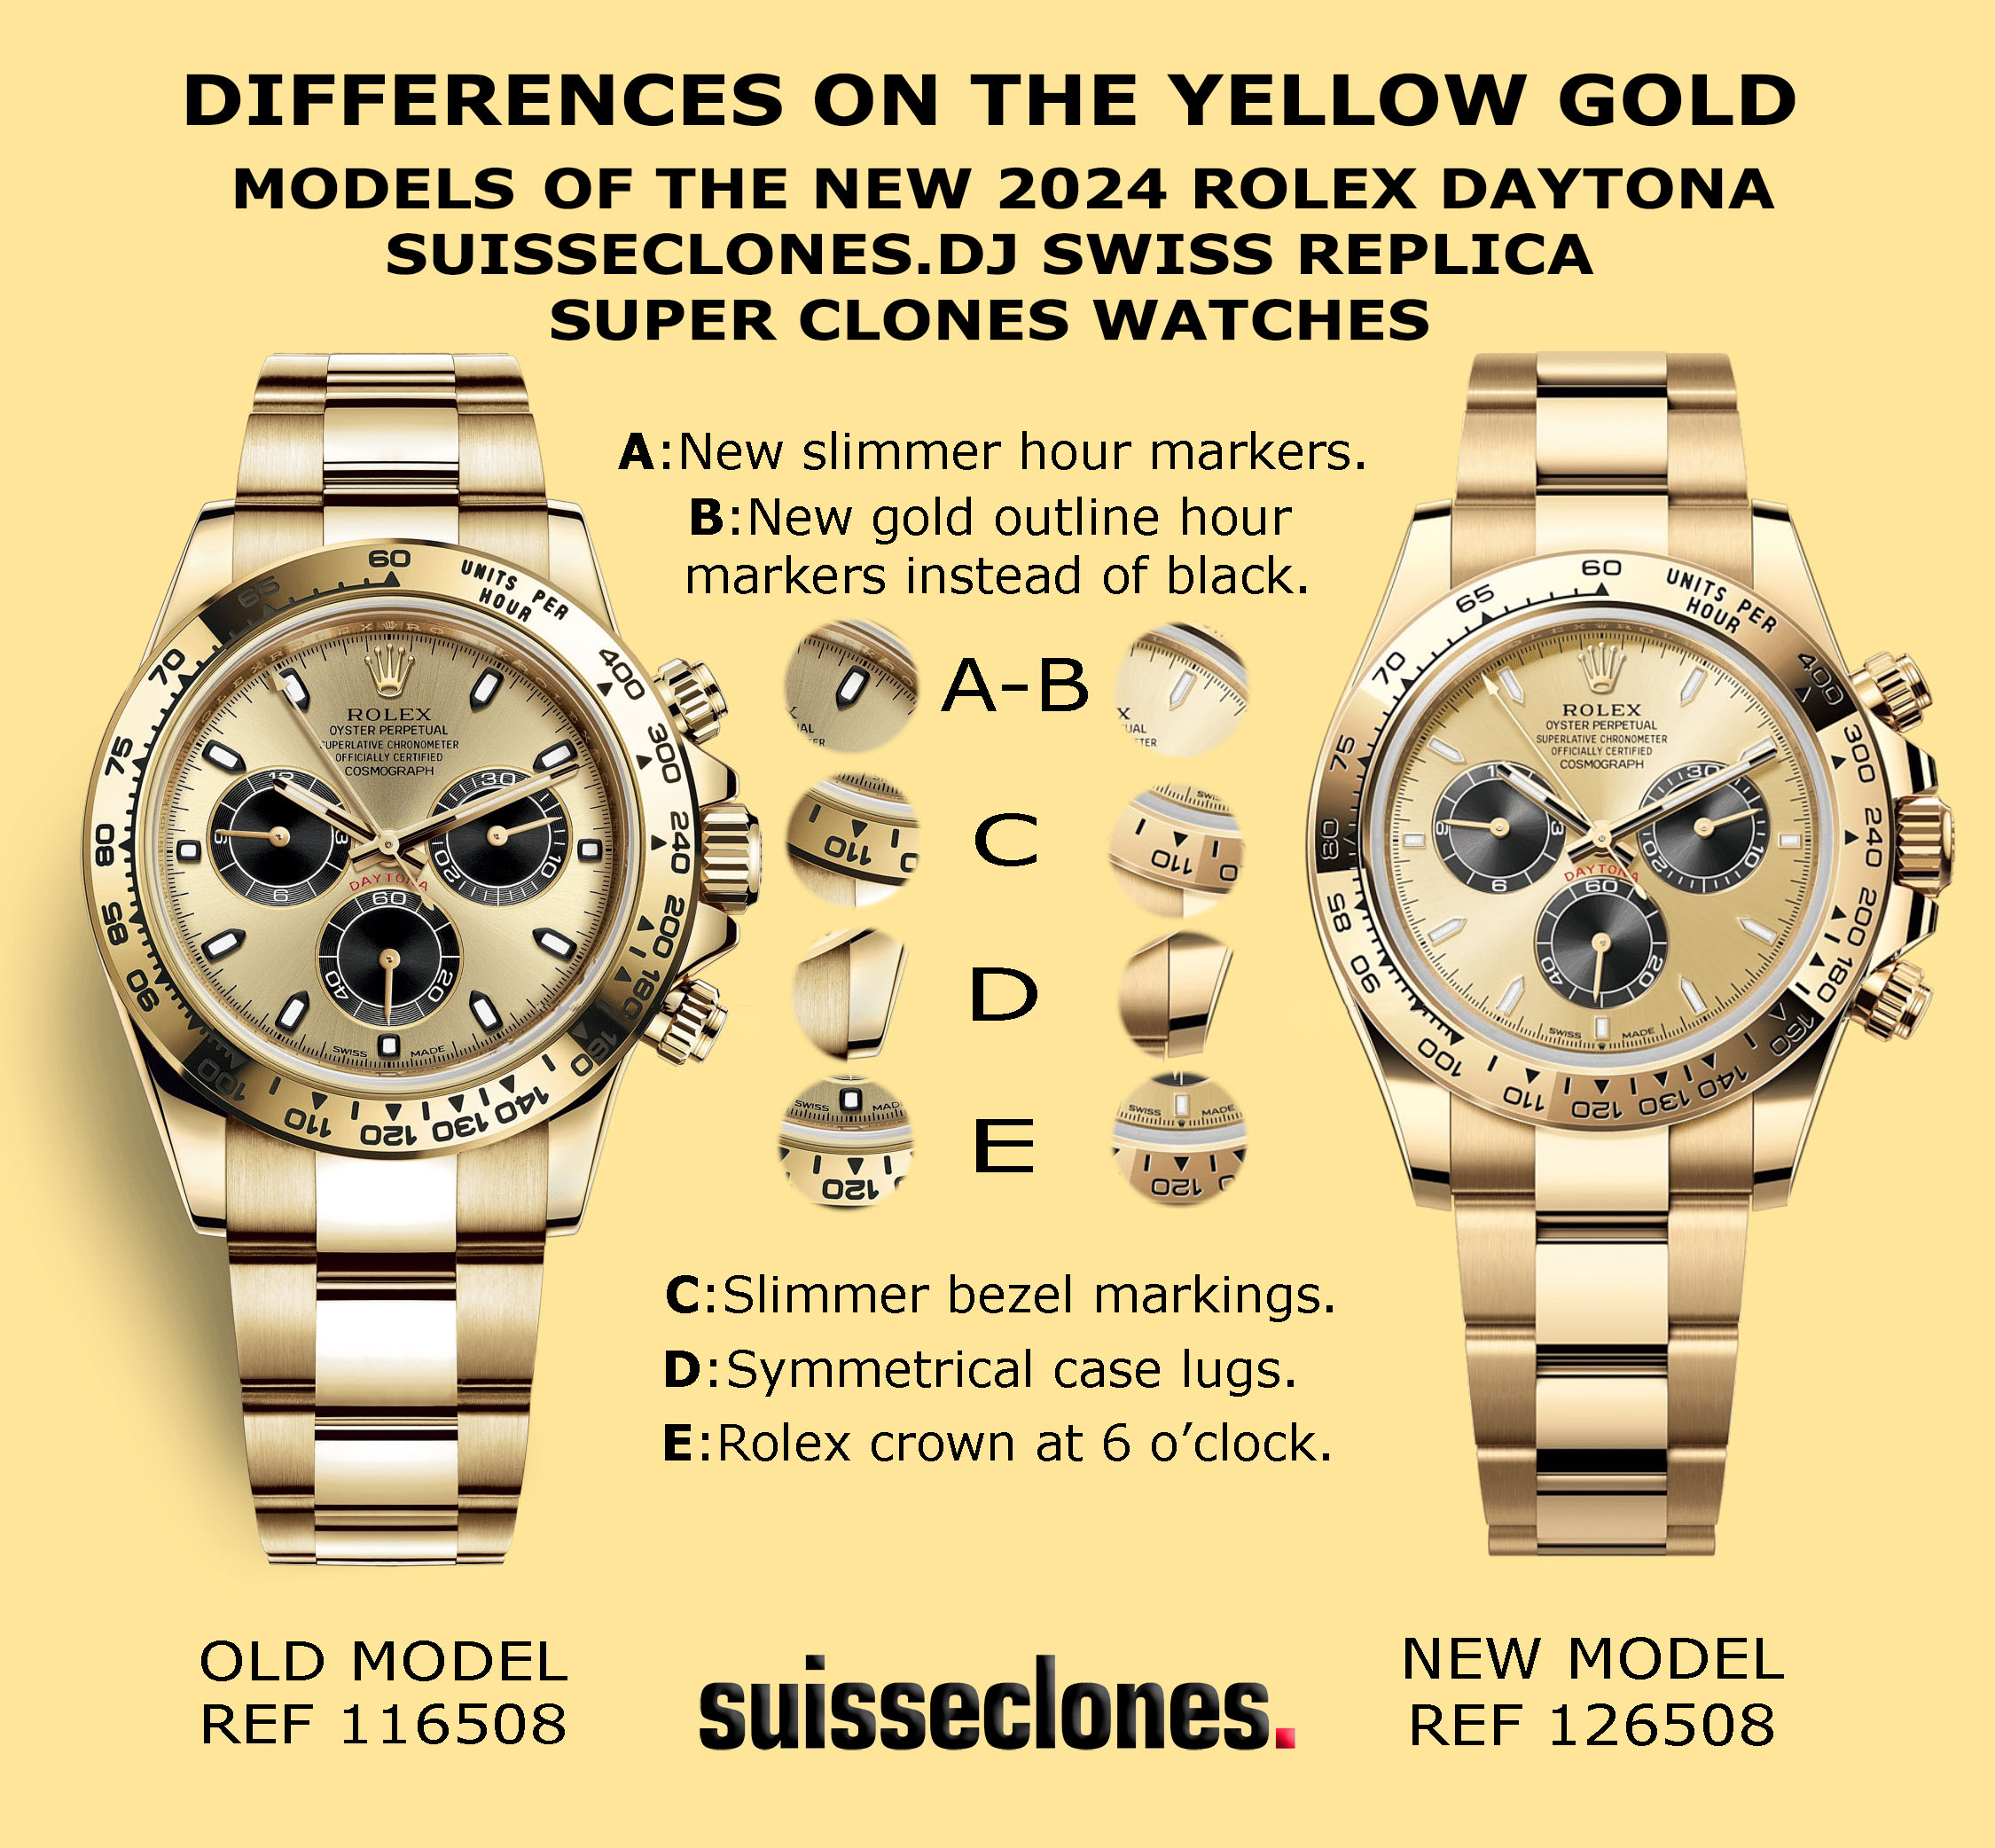 Infographics For The Upgrades Of The Suisseclones.dj 2024 Swiss Replica Daytona Yellow And Rose Gold Super Clone Watches.